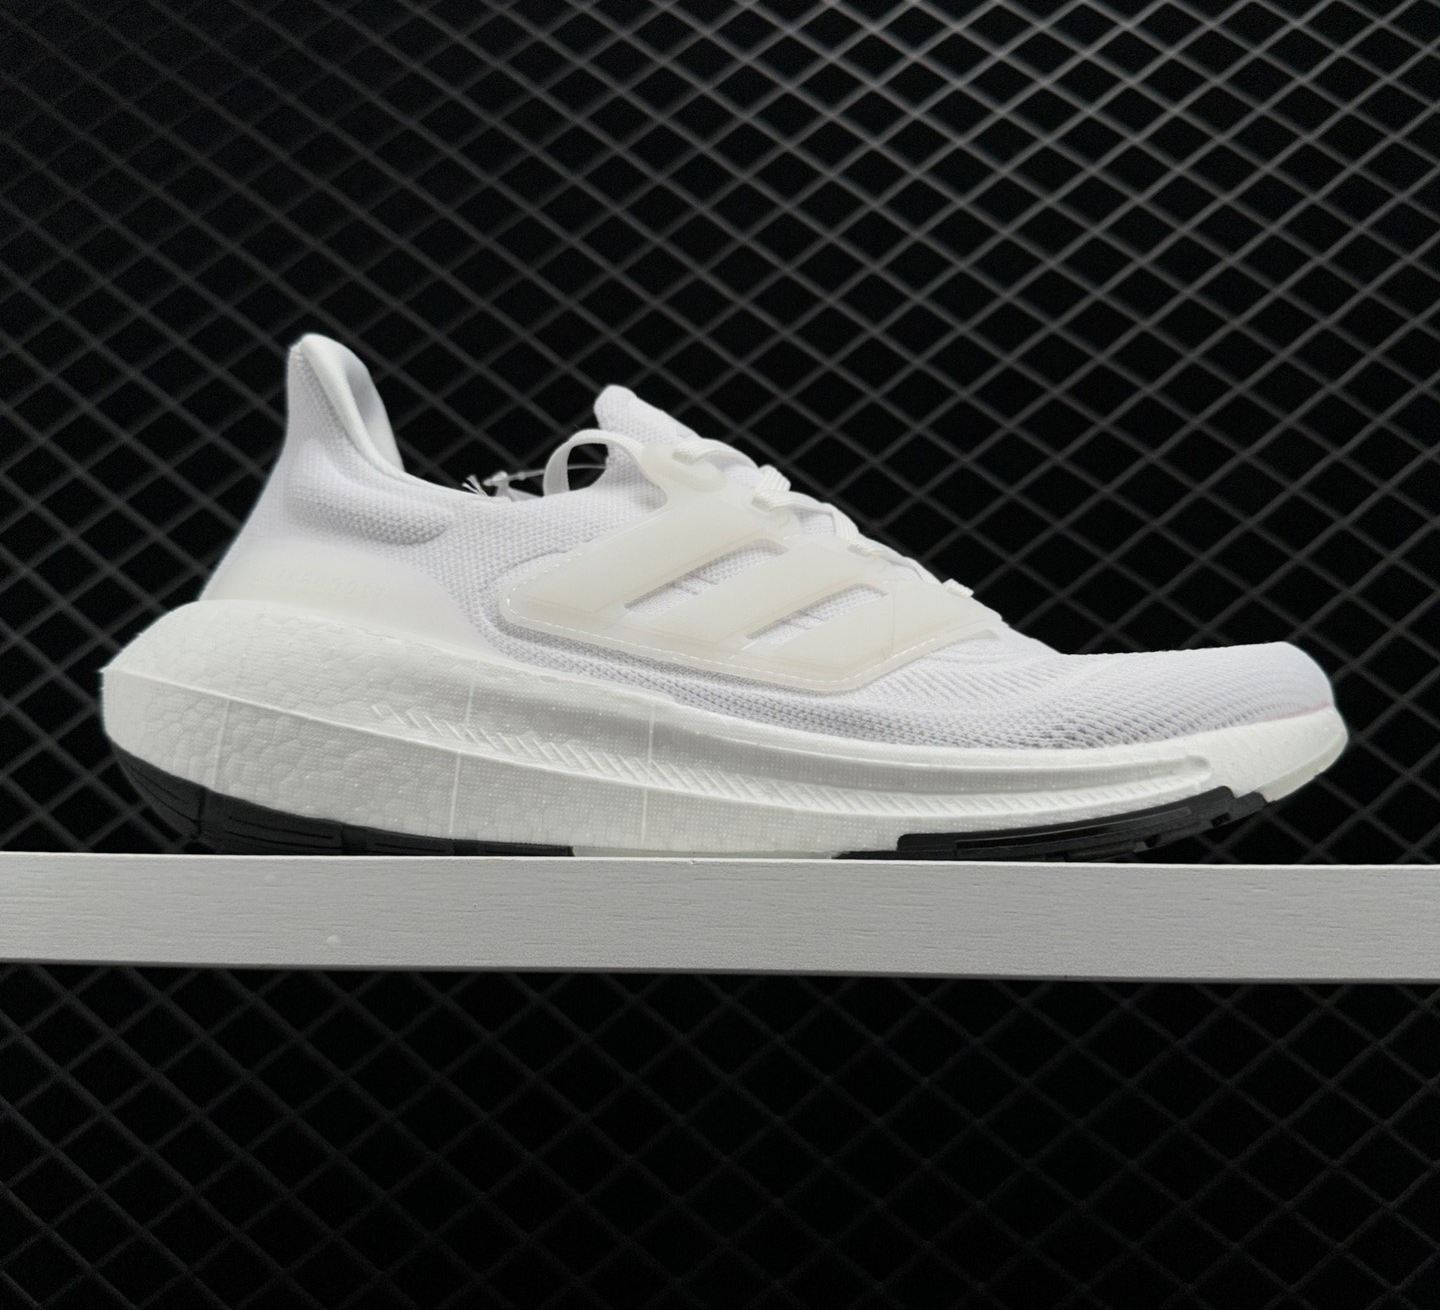 Adidas ULTRABOOST LIGHT Running Shoes White GY9352 | Enhance Performance with Lightweight Comfort